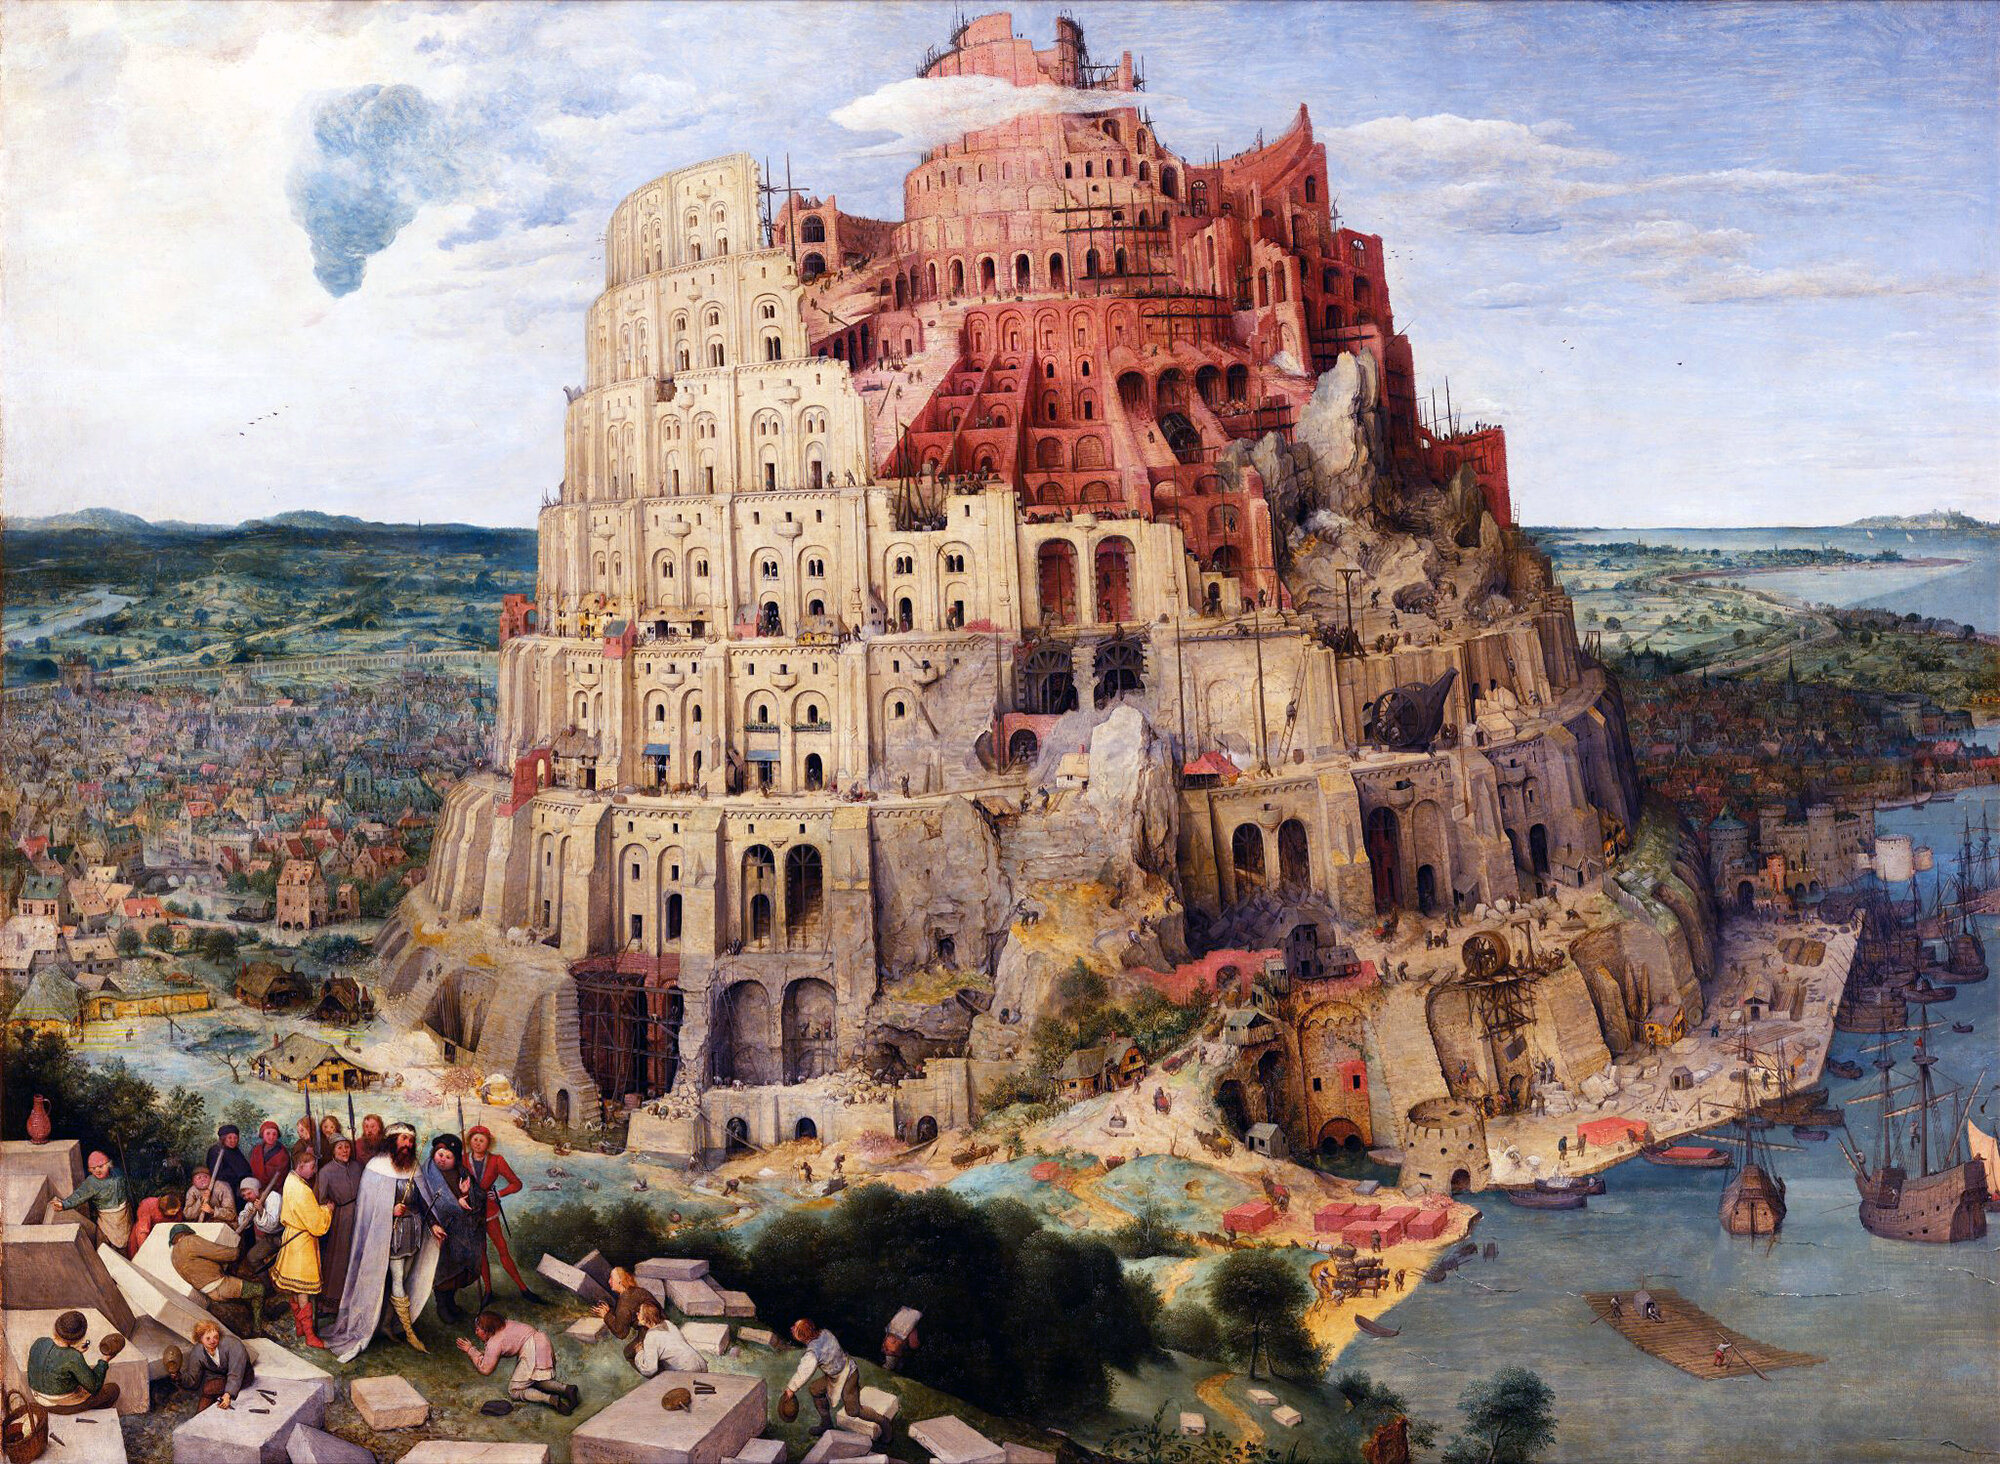 1563 painting by Pieter Bruegel the Elder, titled The Great Tower of Babel. Bruegel shows the tower during construction, with a solid form and a gently spiralling ramp along the outer edge.